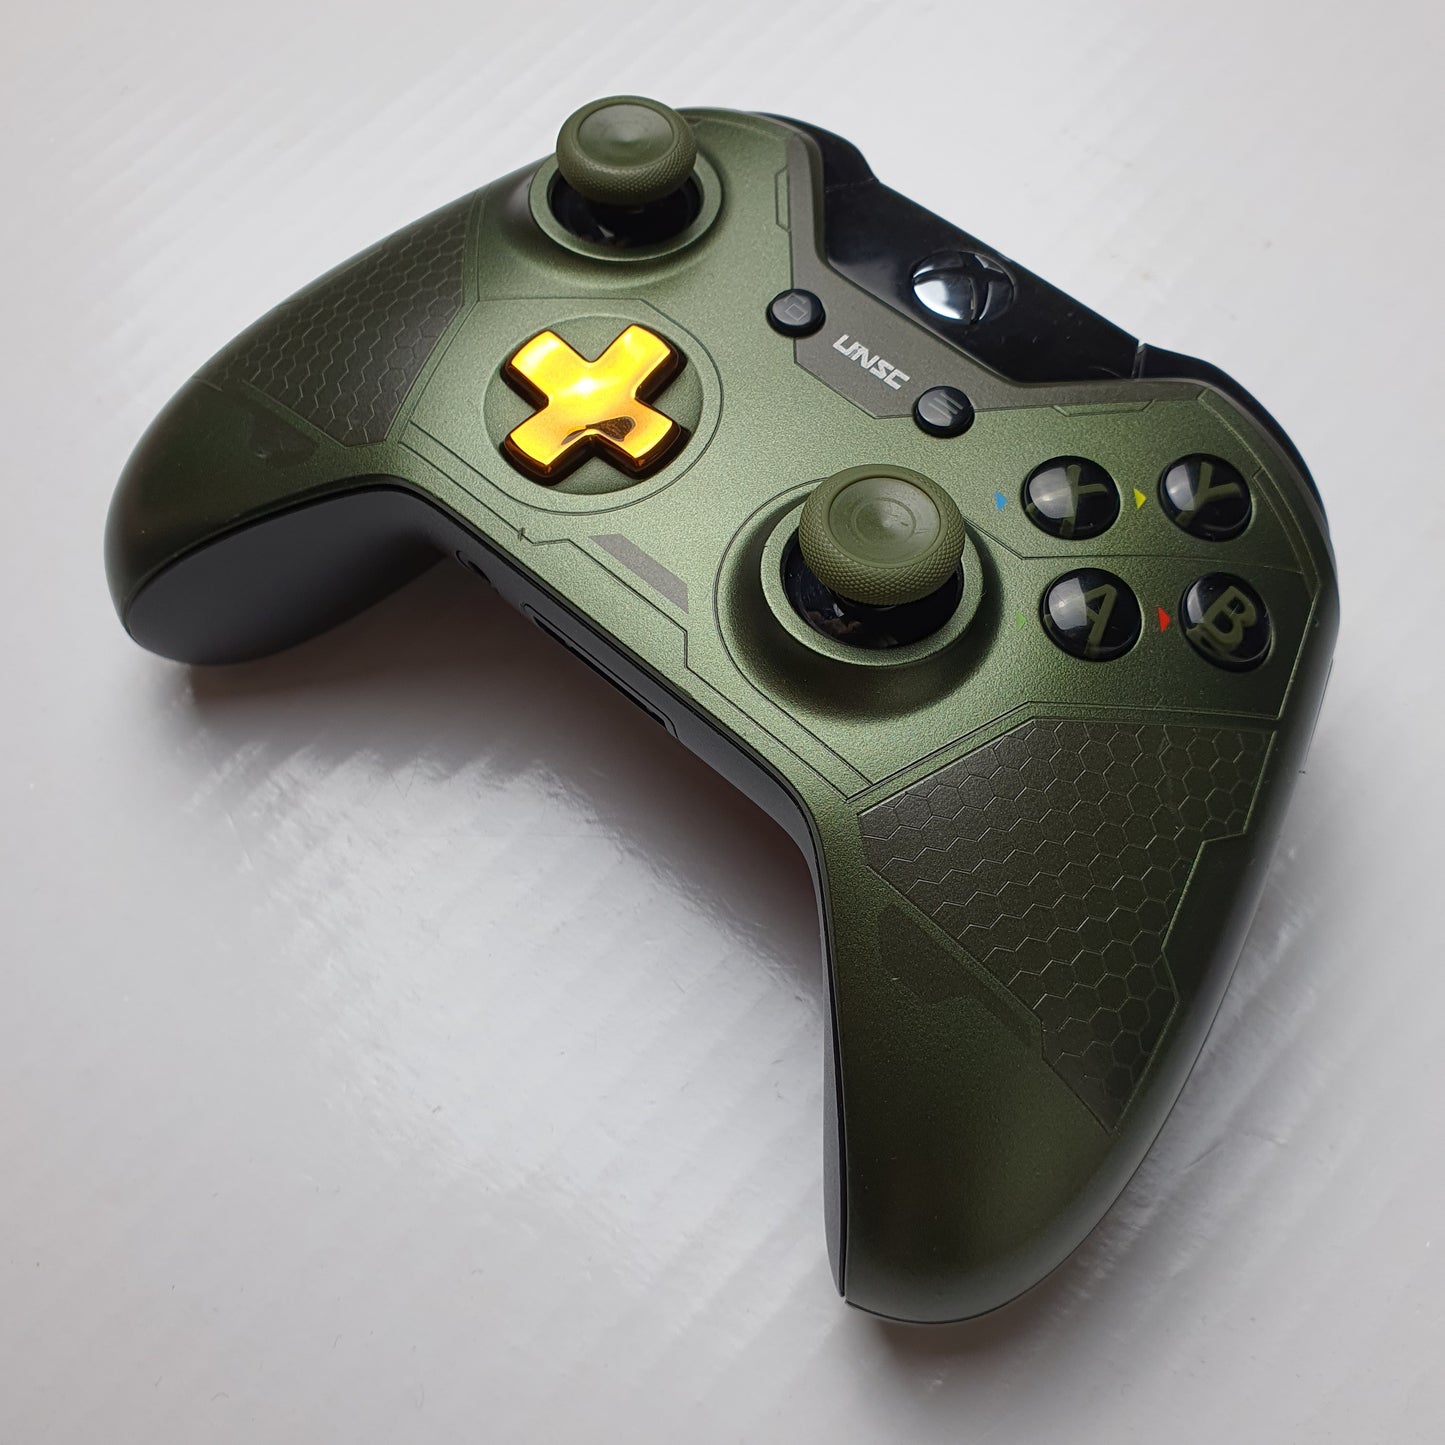 Official Microsoft Xbox One Limited Edition Master Chief Wireless Controller 1697